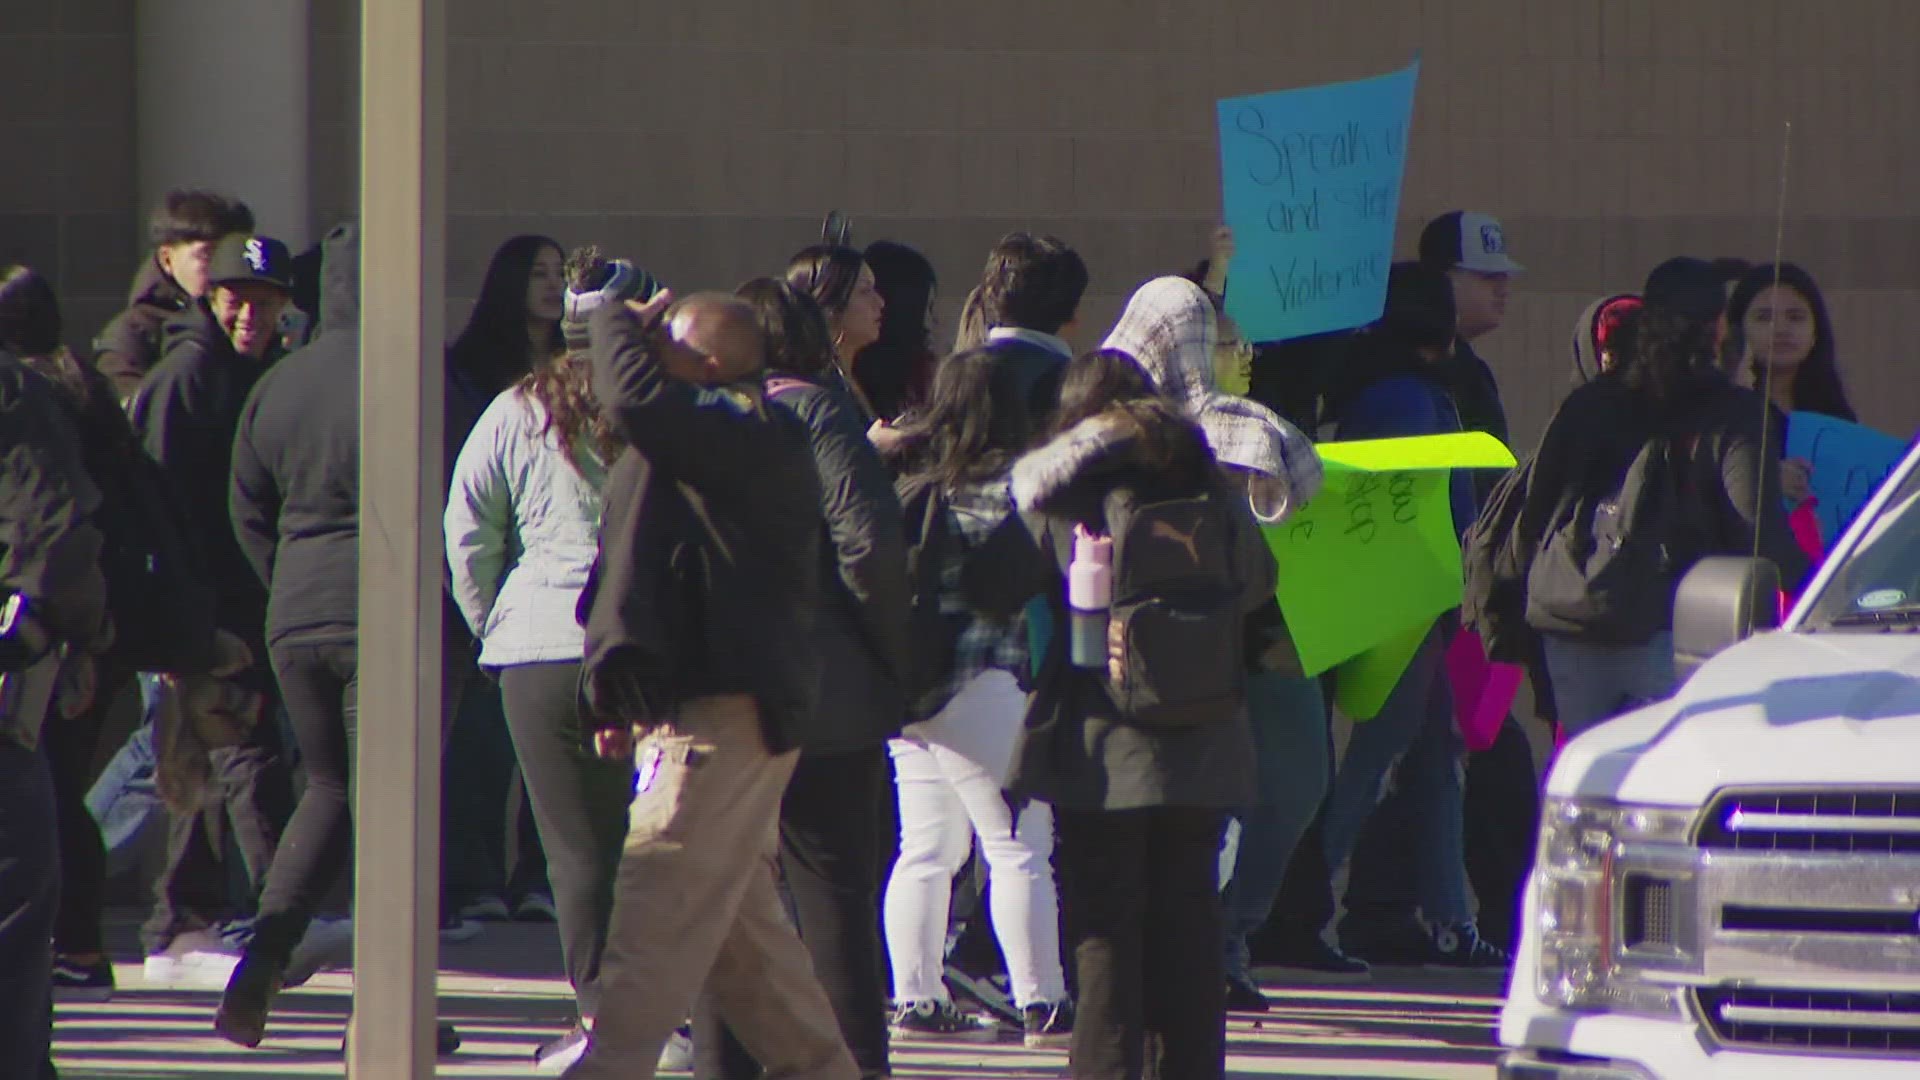 Students at Dr. Martin Luther King, Jr. Early College walked out of class Tuesday to protest the district's security policies.